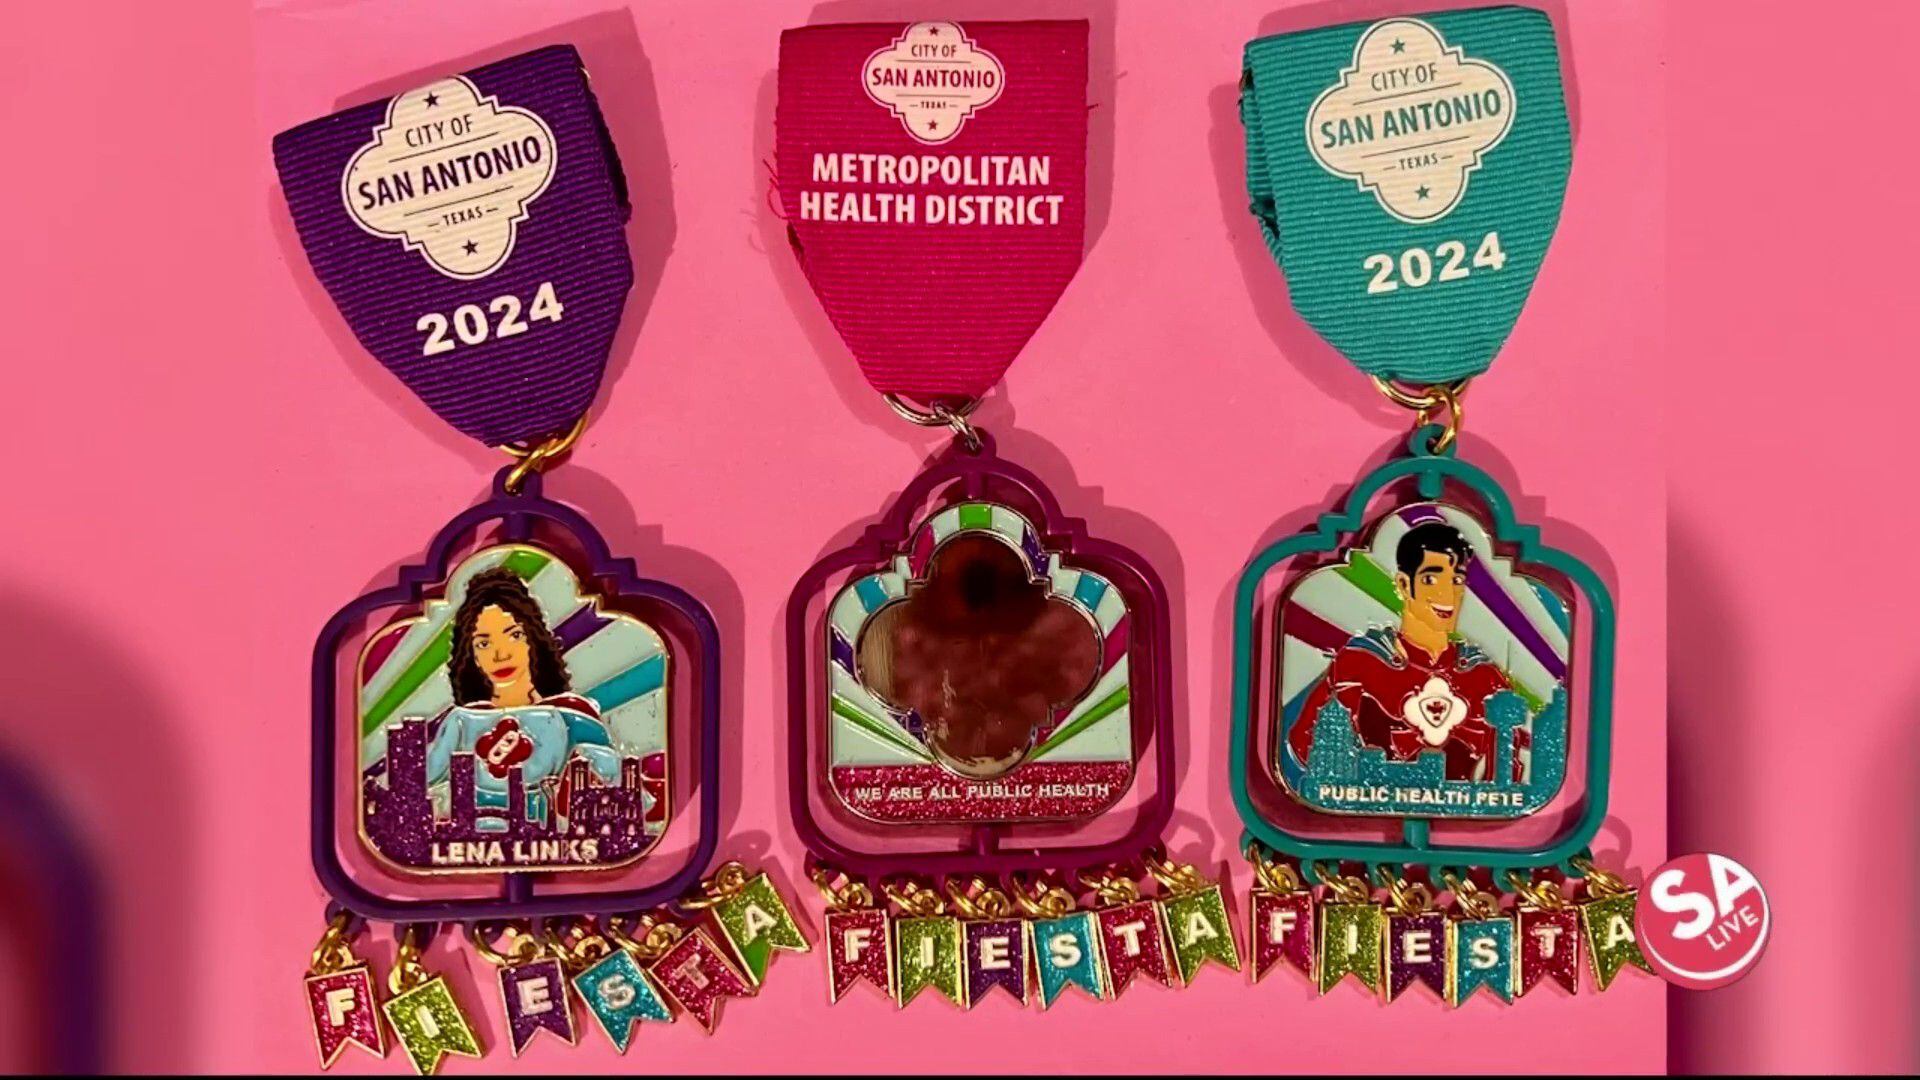 Pictured are the 2024 Fiesta medals for the City of San Antonio Metropolitan Health District.